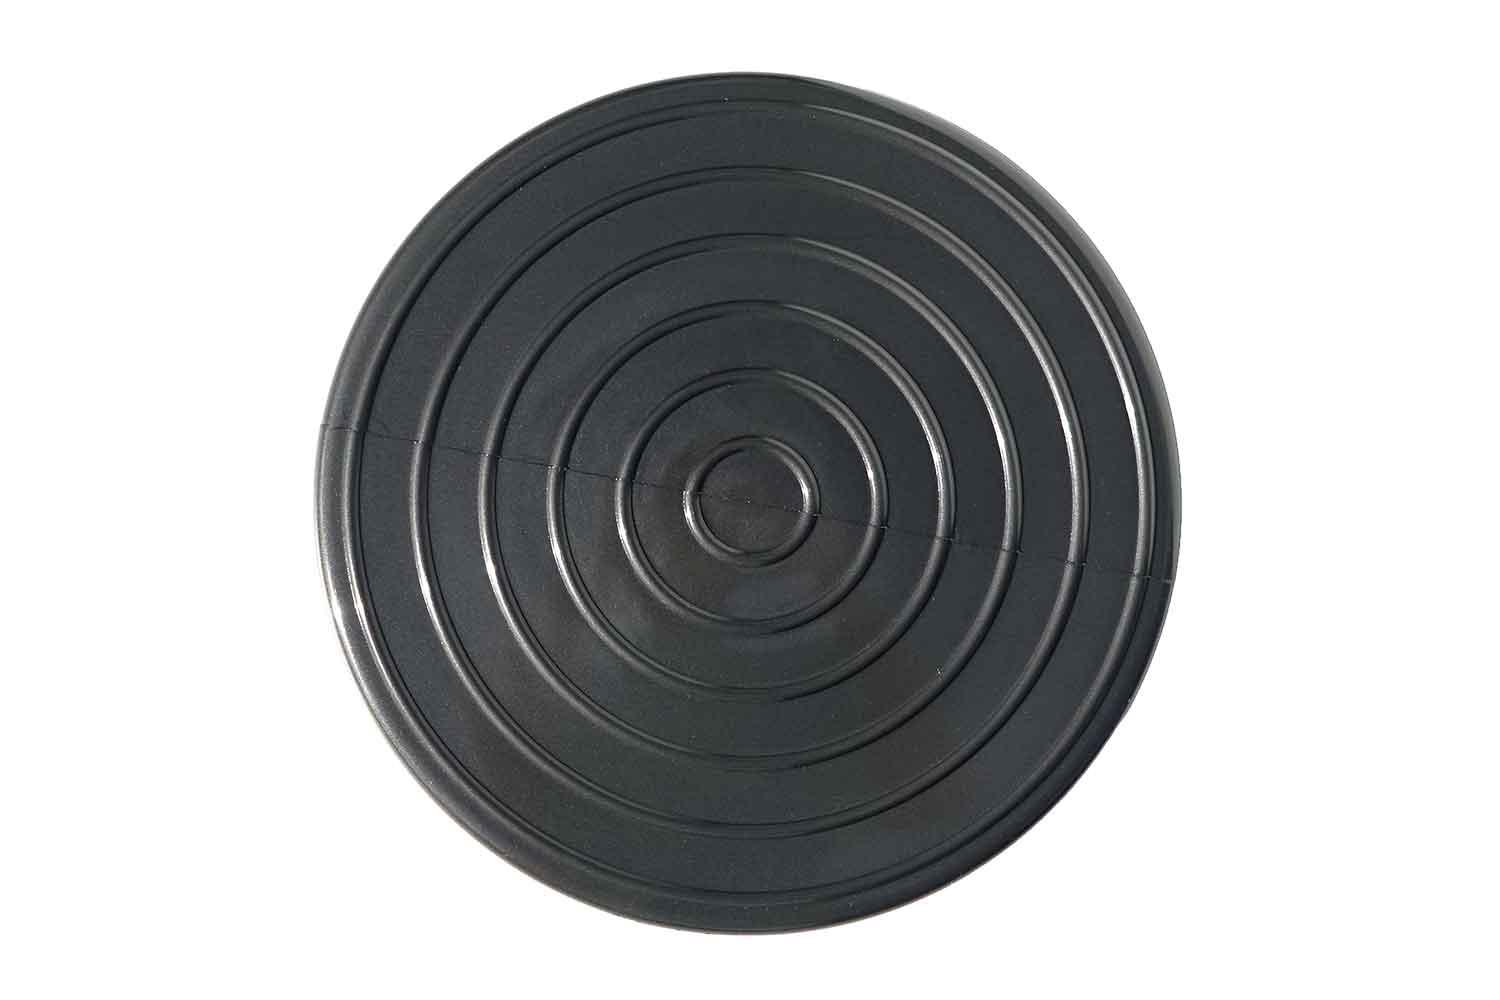 Easy Start Balance Disc, 40 cm, for CoolBoard wobble board, shown from top